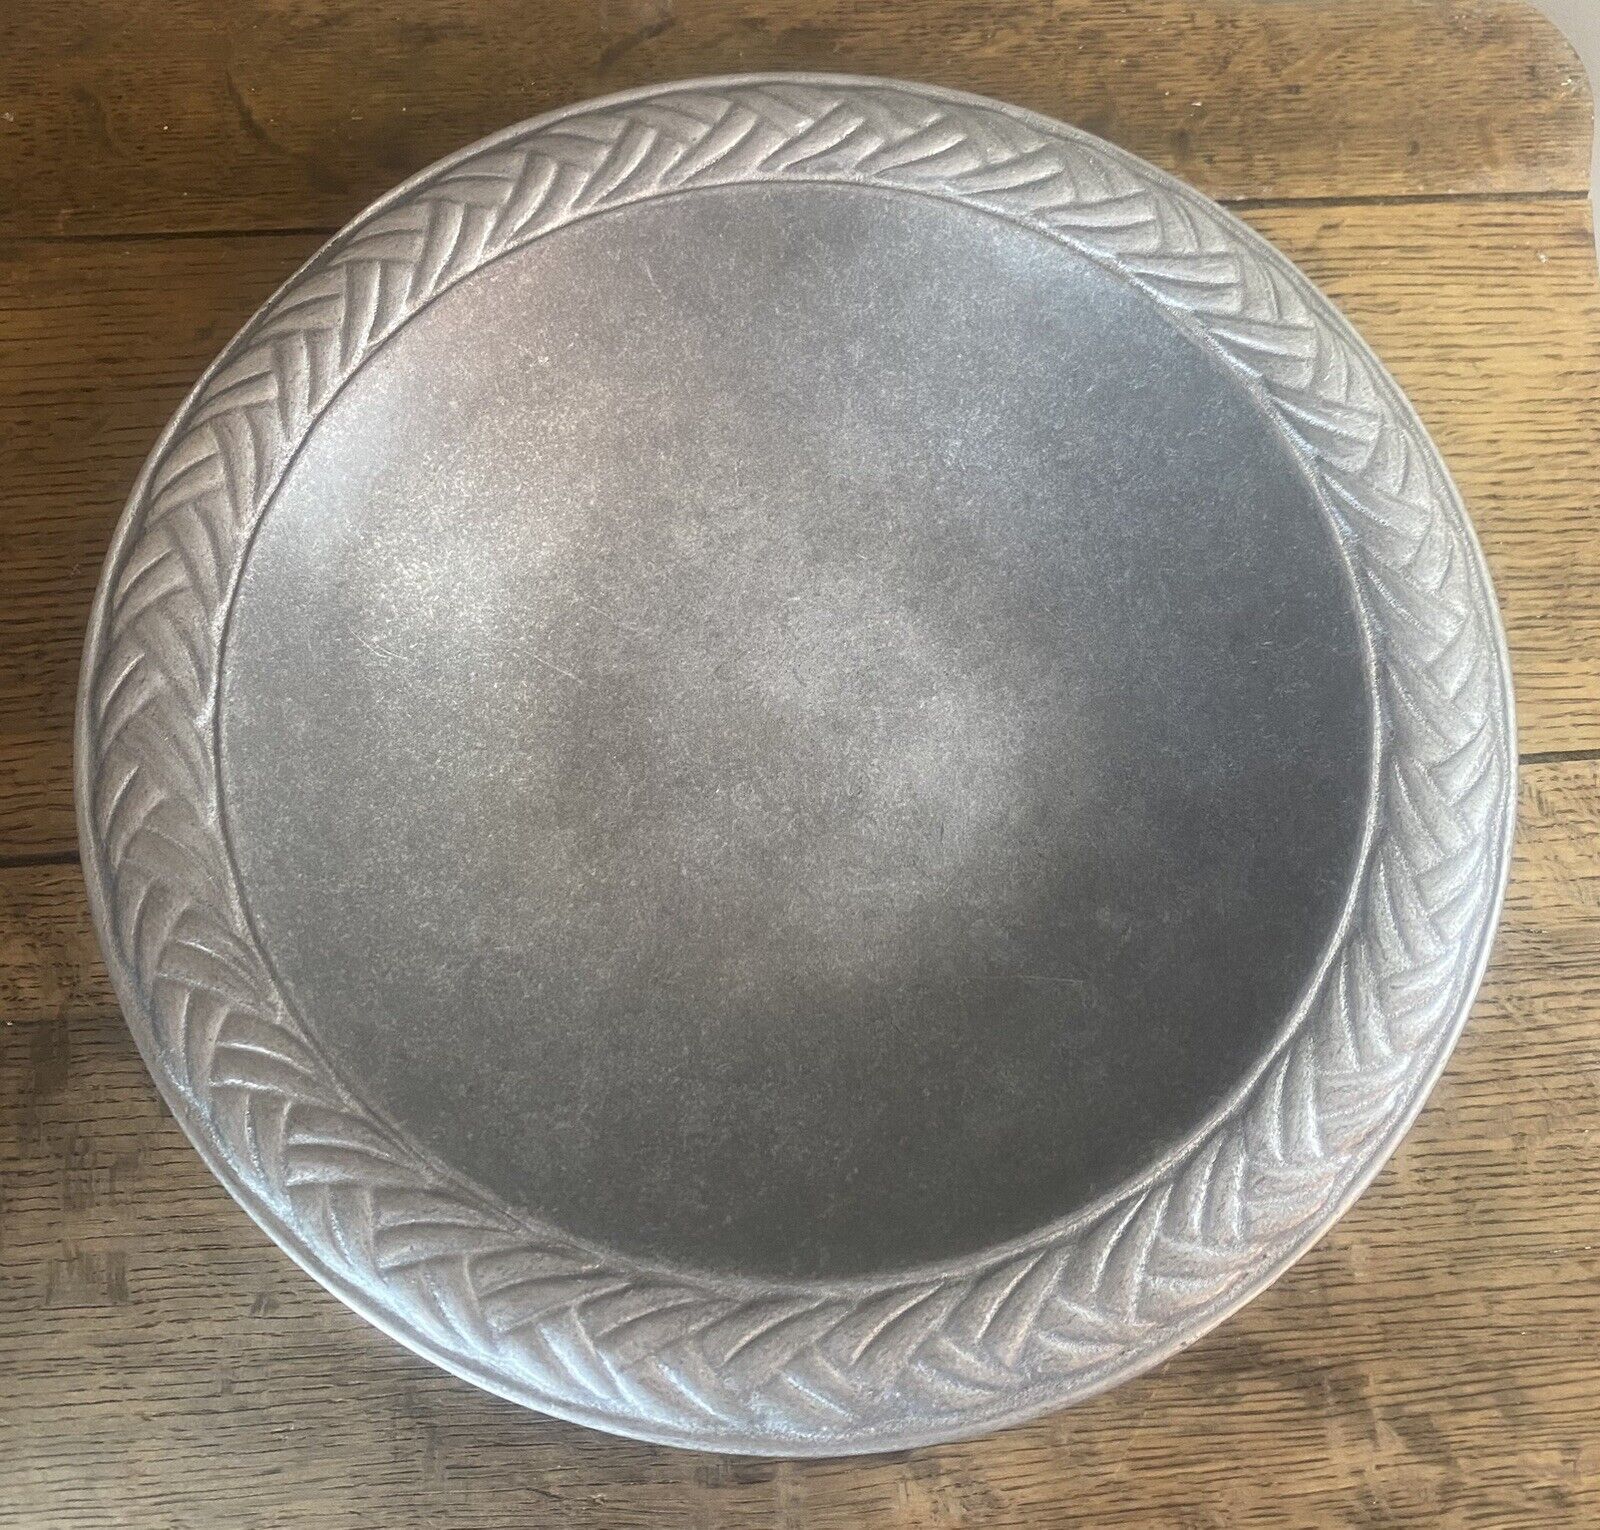 WILTON ARMETALE Pewter PATIO ROPE 11 1/2” Bowl Serving Tray